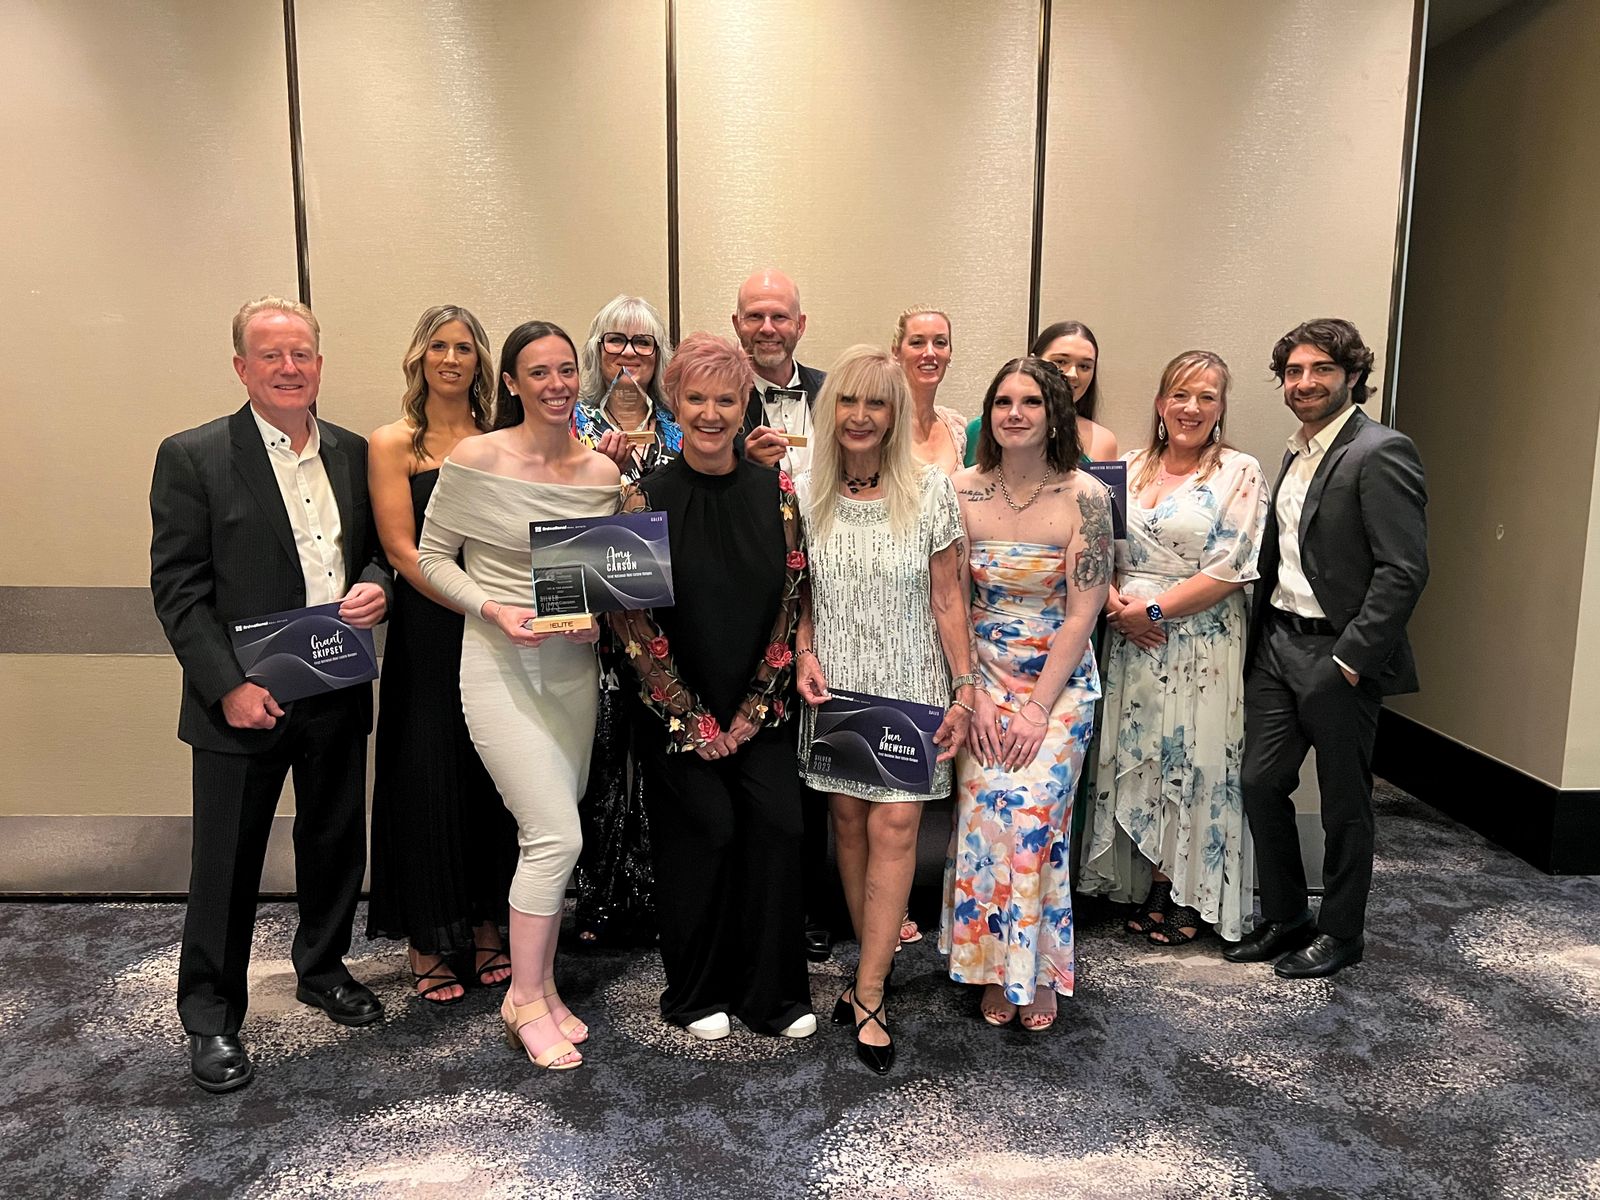 RANGES FIRST NATIONAL REAL ESTATE AGENCY REAPS GENERAL EXCELLENCE & MARKETING AWARDS